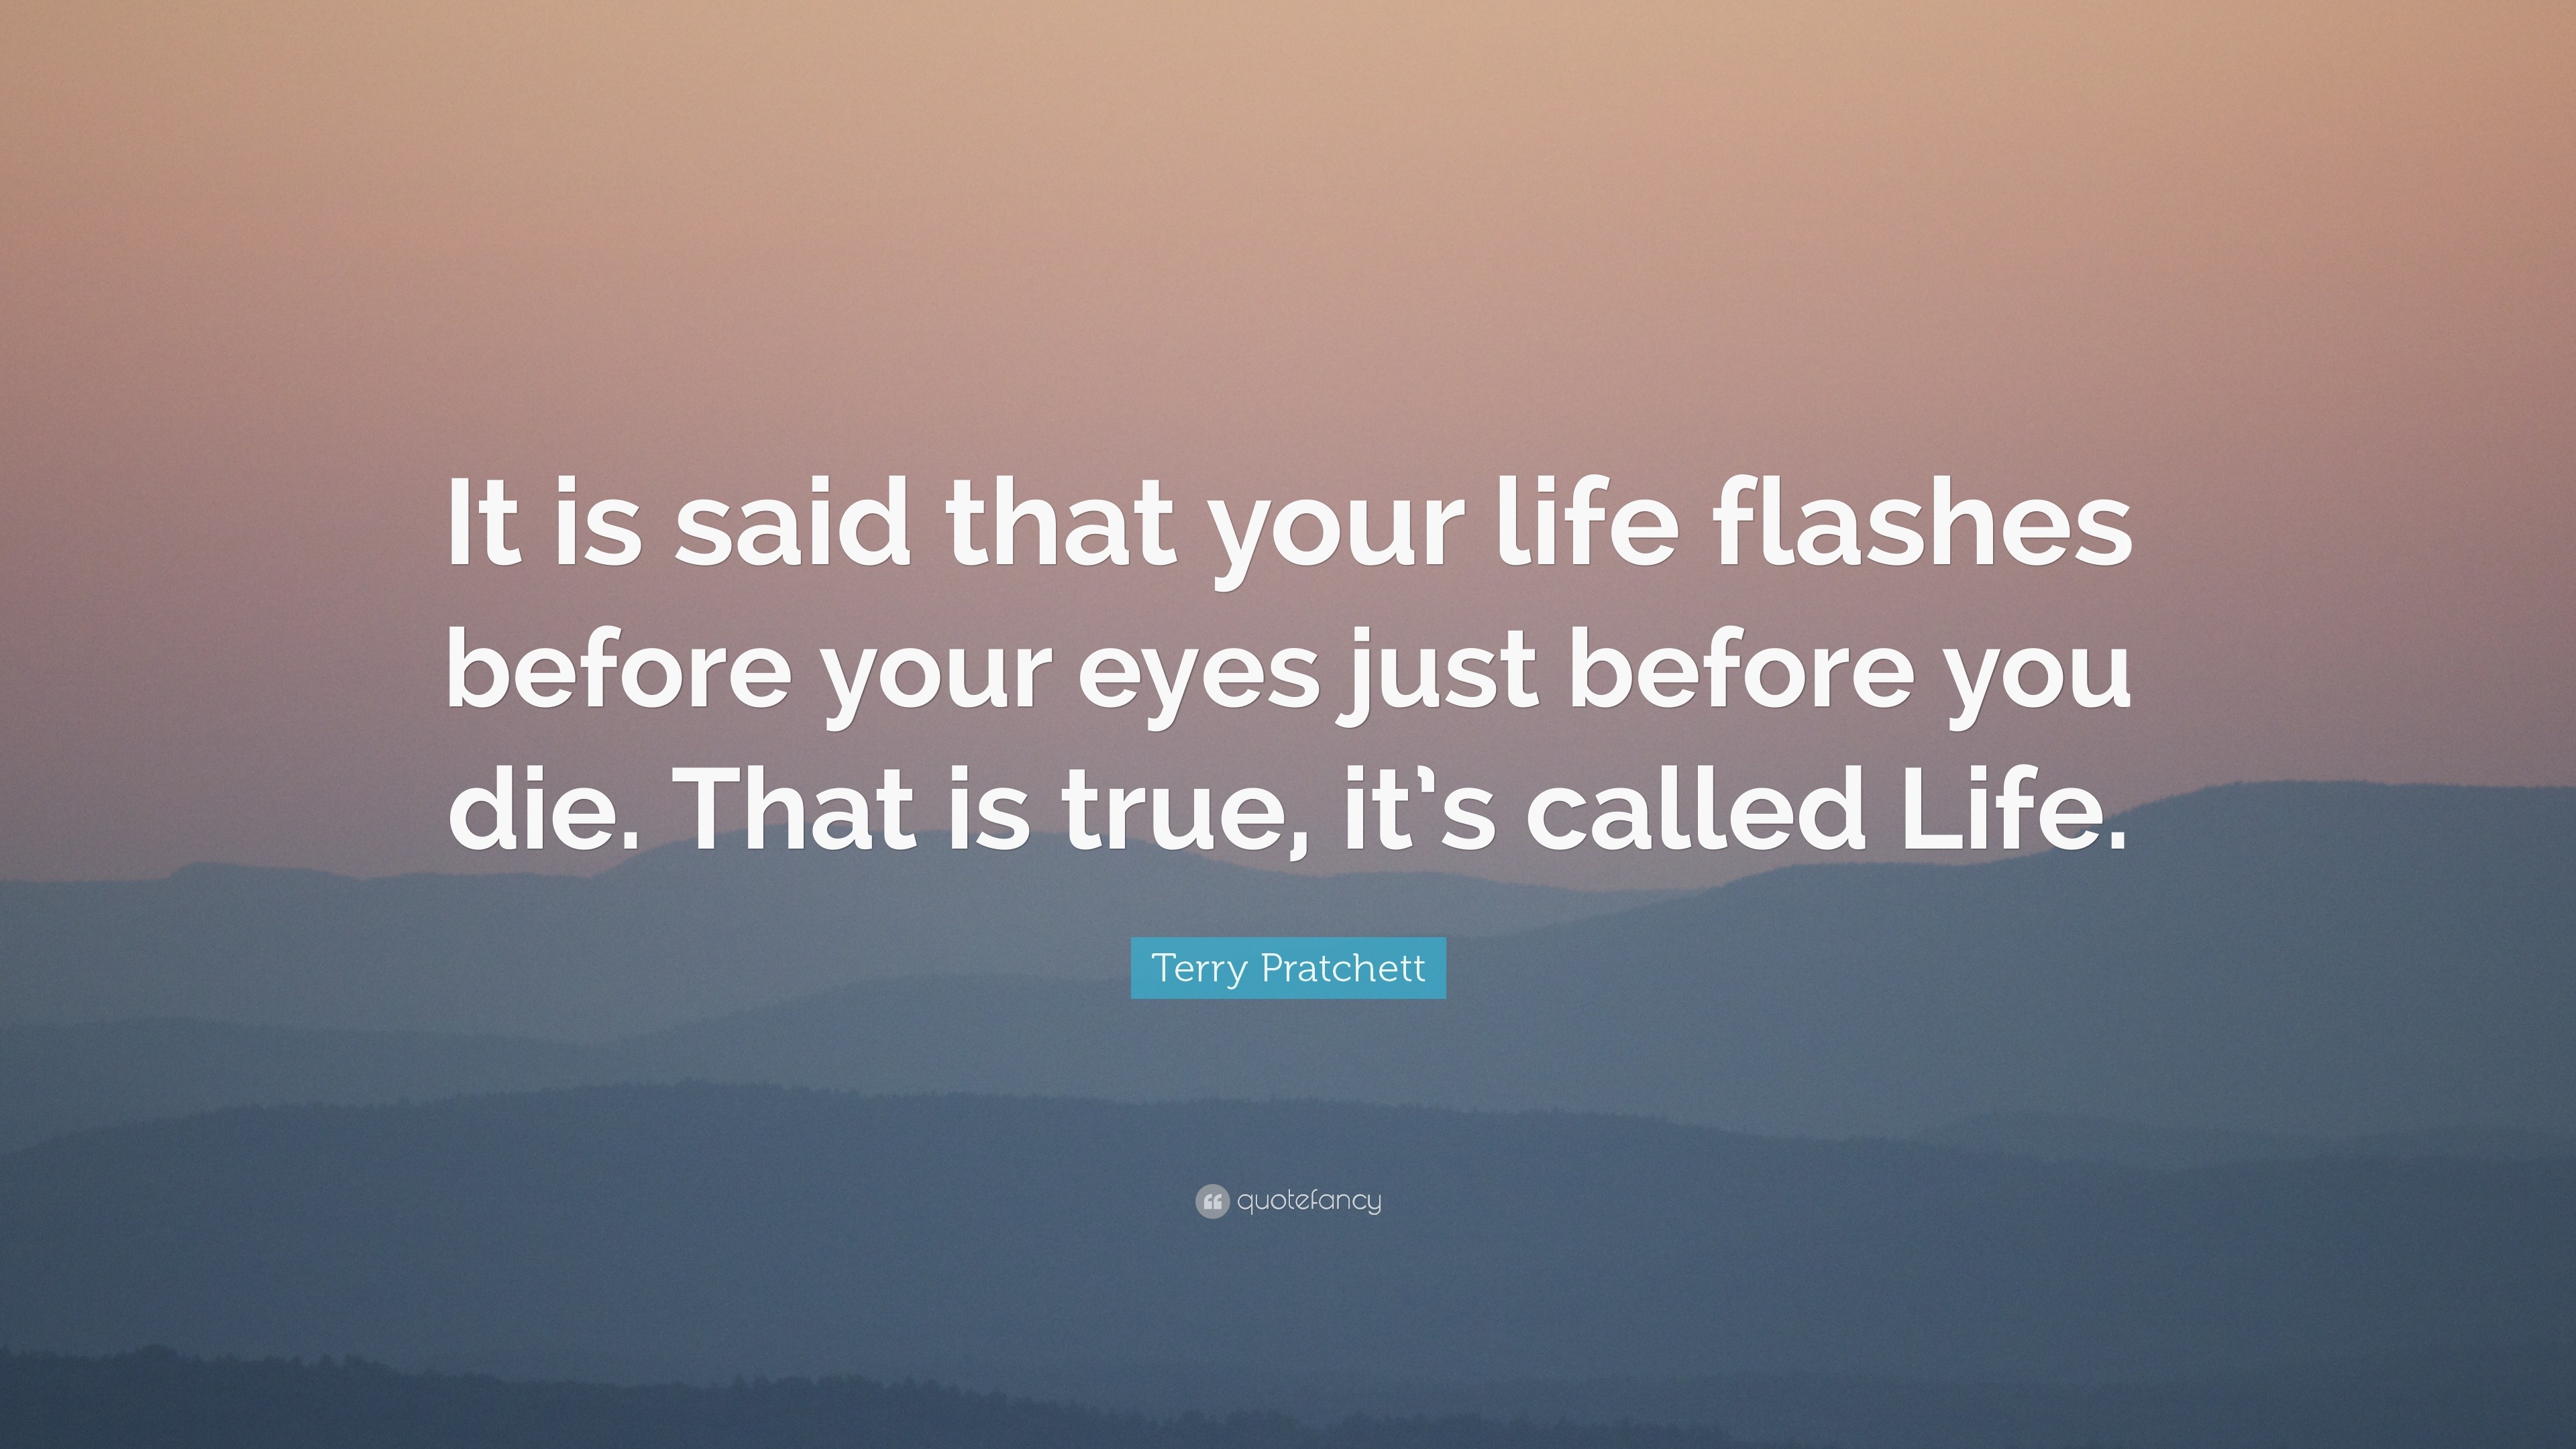 whne your life flashes before your eyes